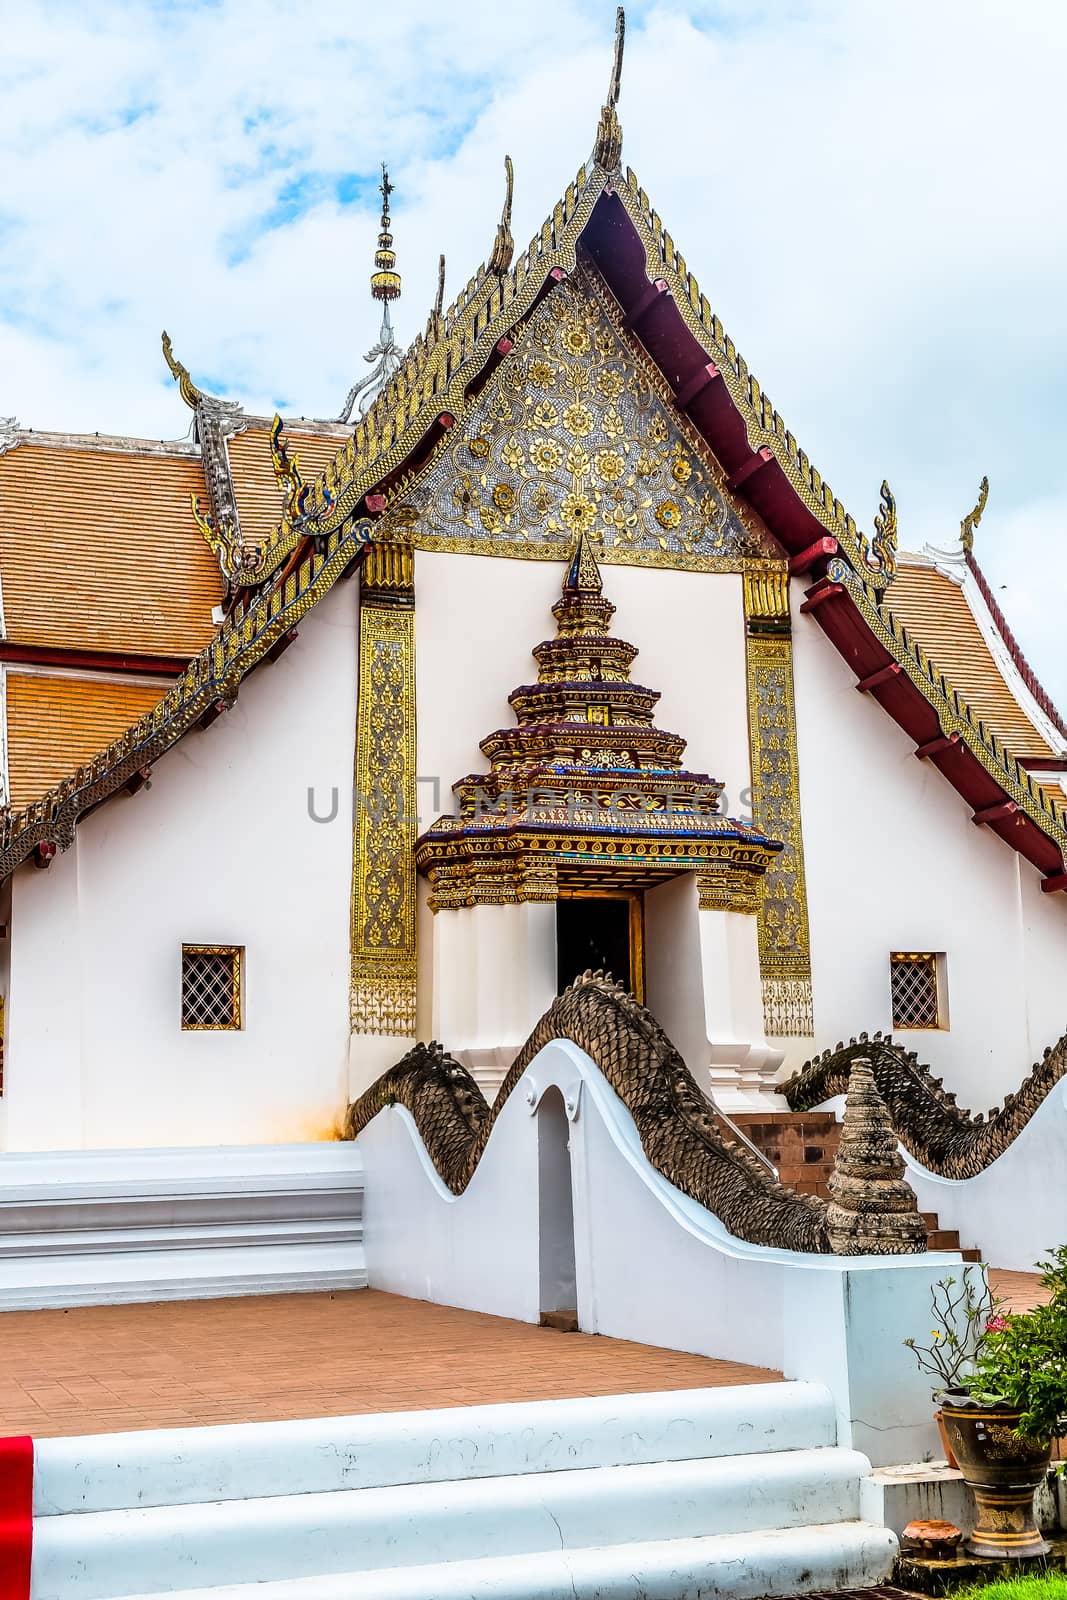 Image of Ancient Temple Wat Phumin, Wat Phumin is a famous temple in Nan province, Thailand